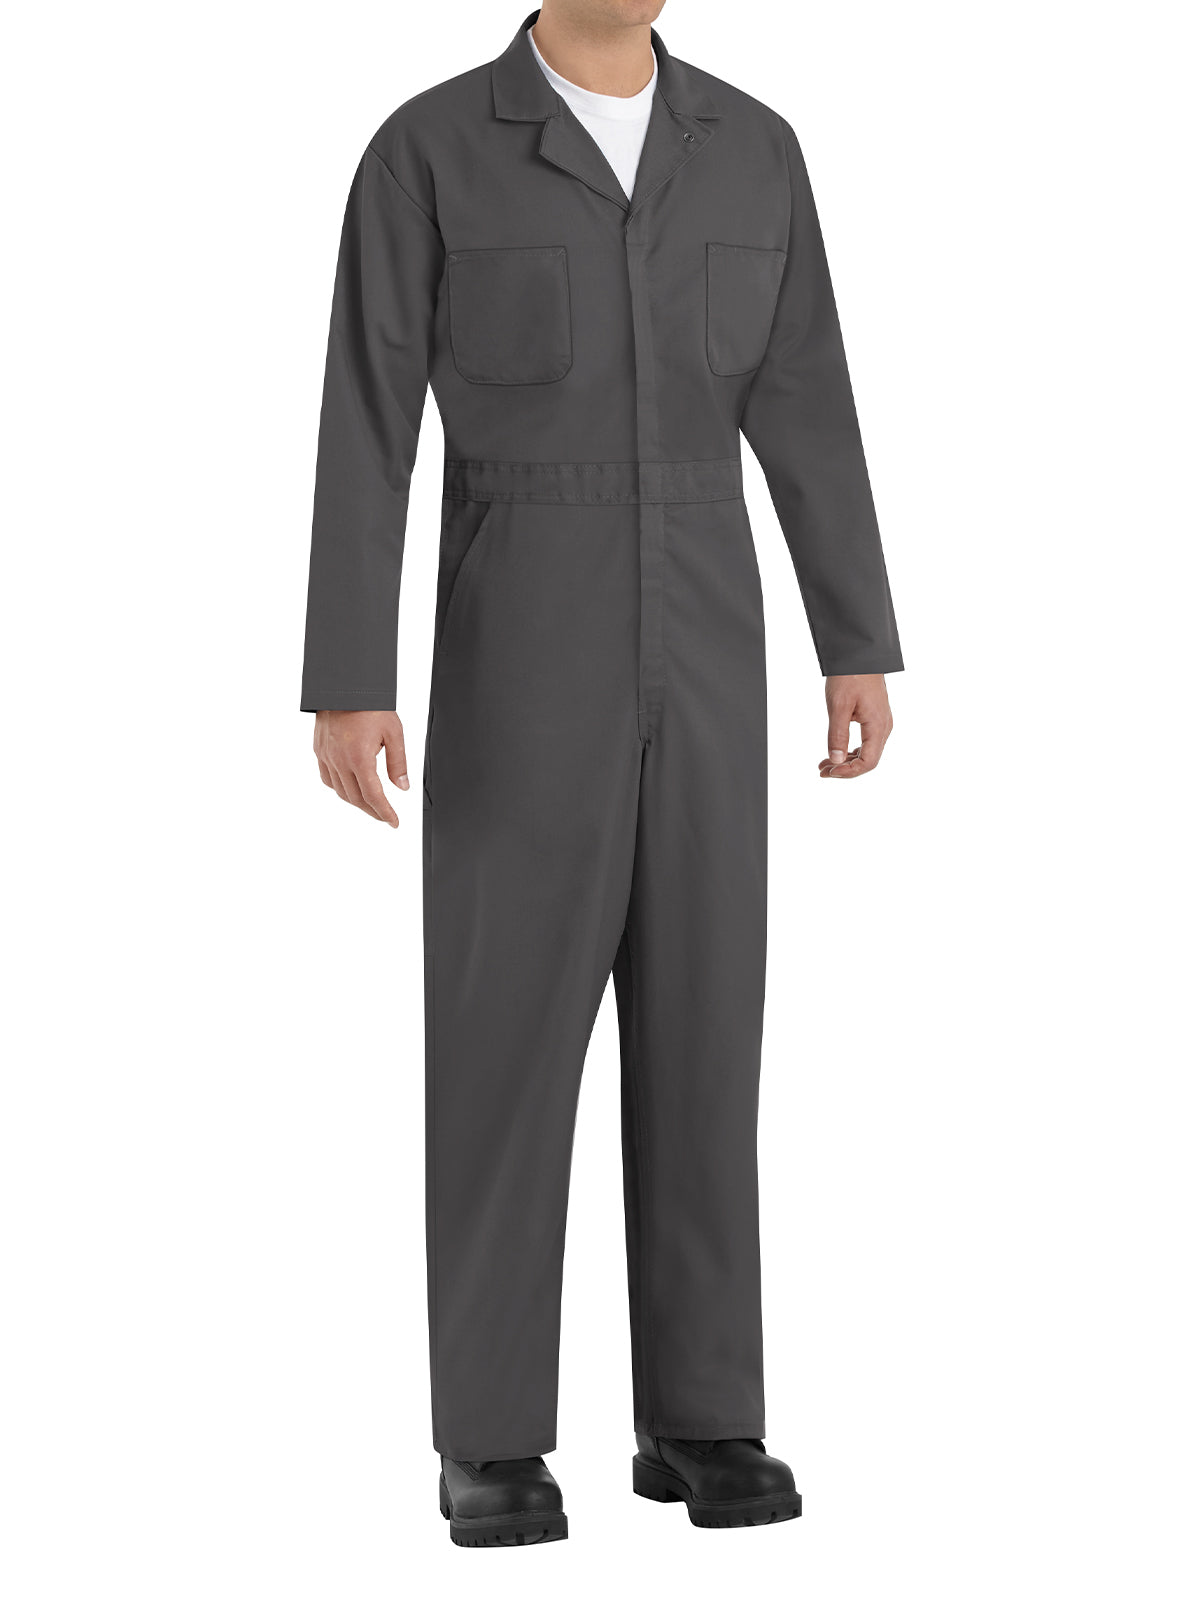 Men's Action Back Coverall - CT10 - Charcoal